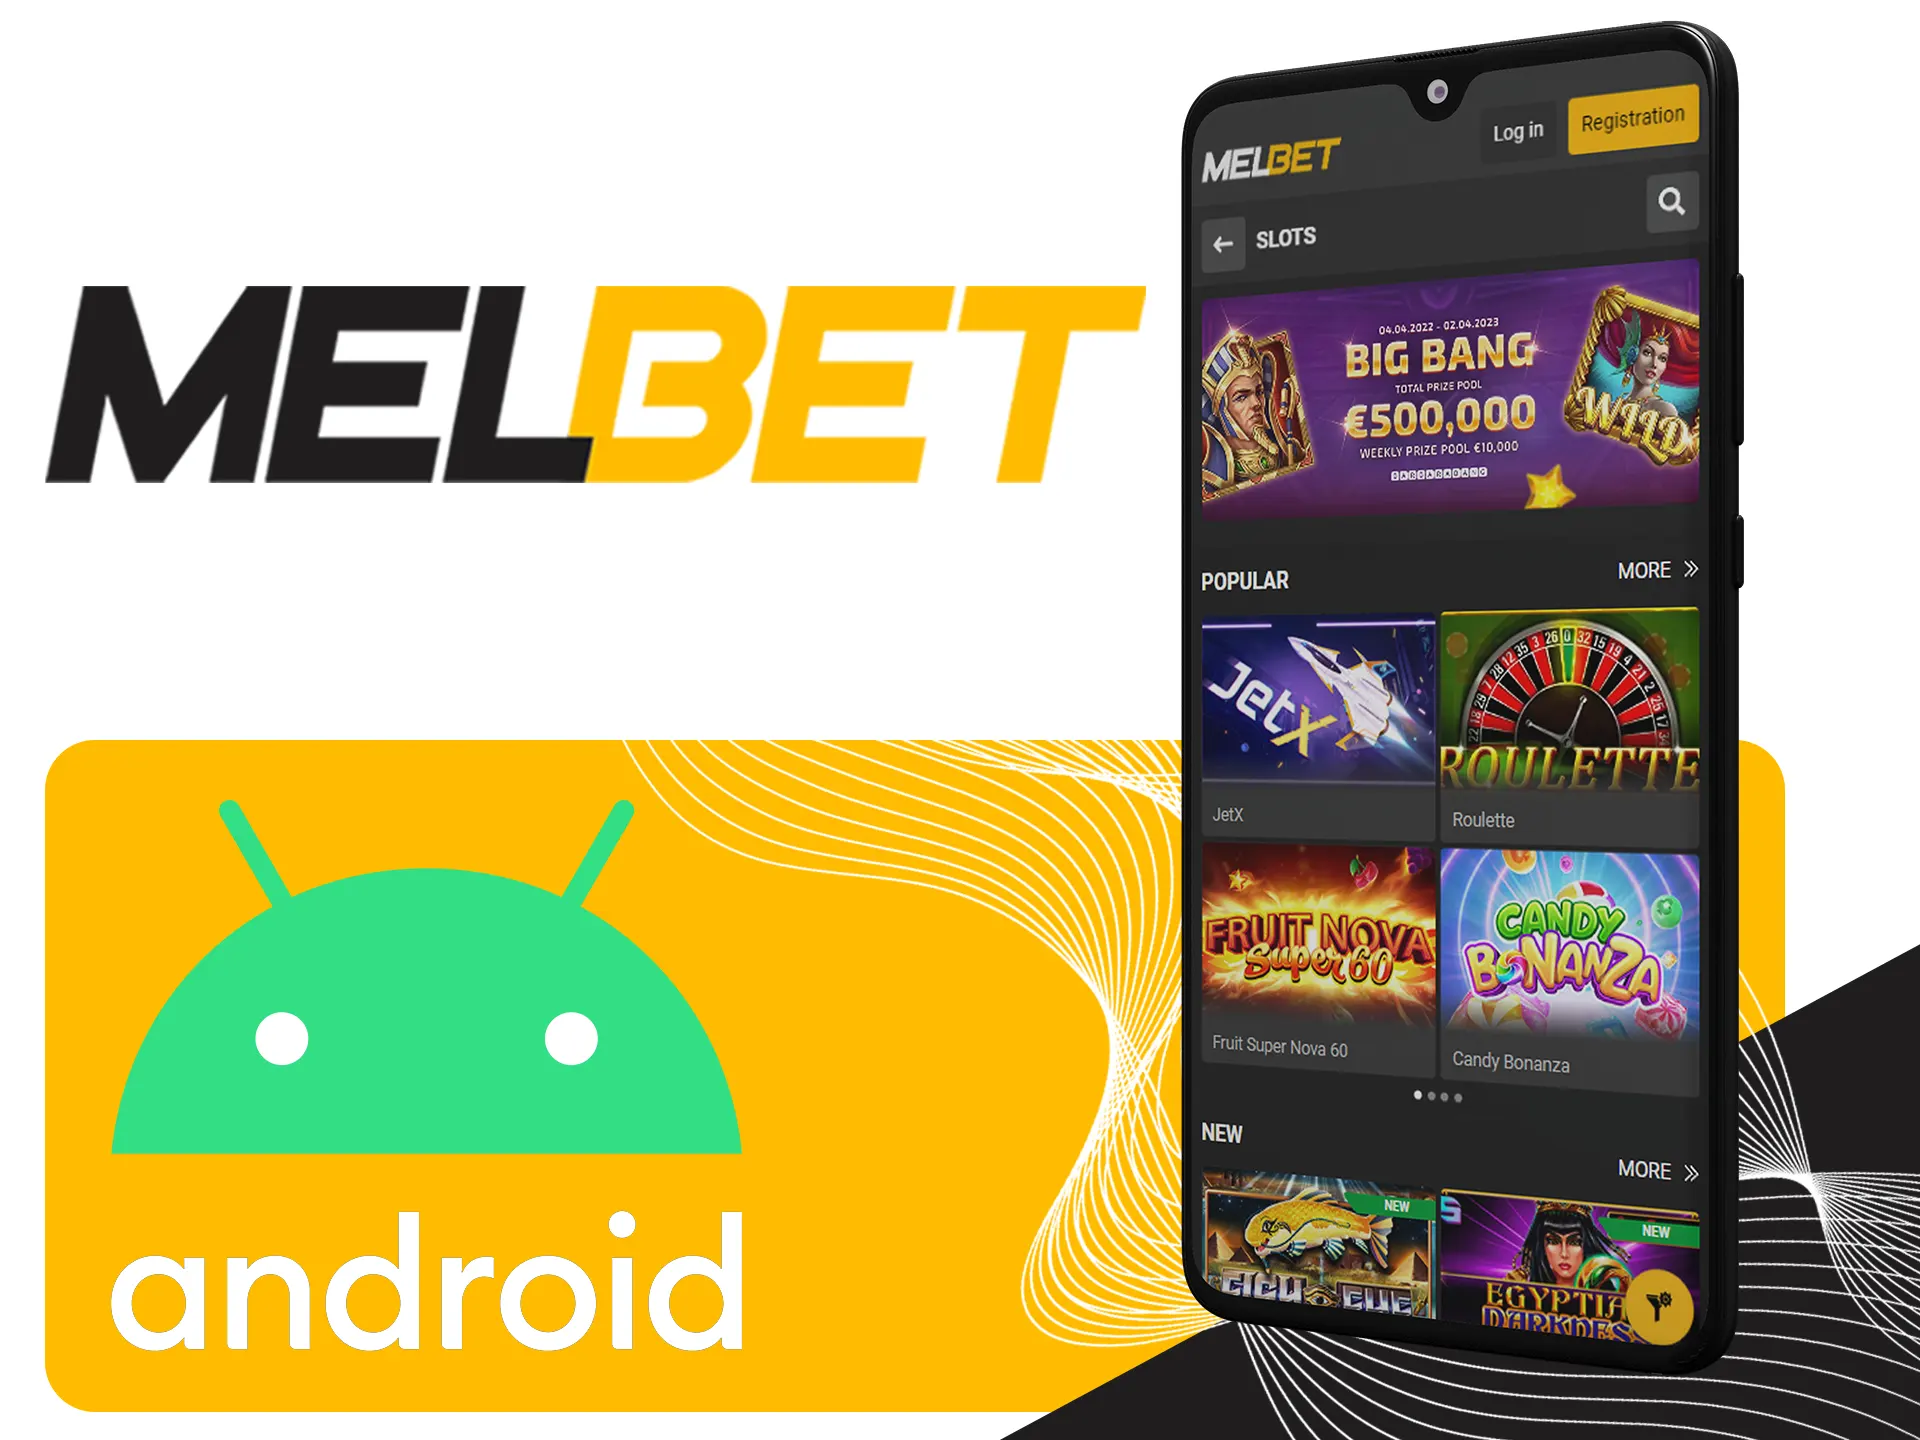 Melbet app supports all of the android devices.